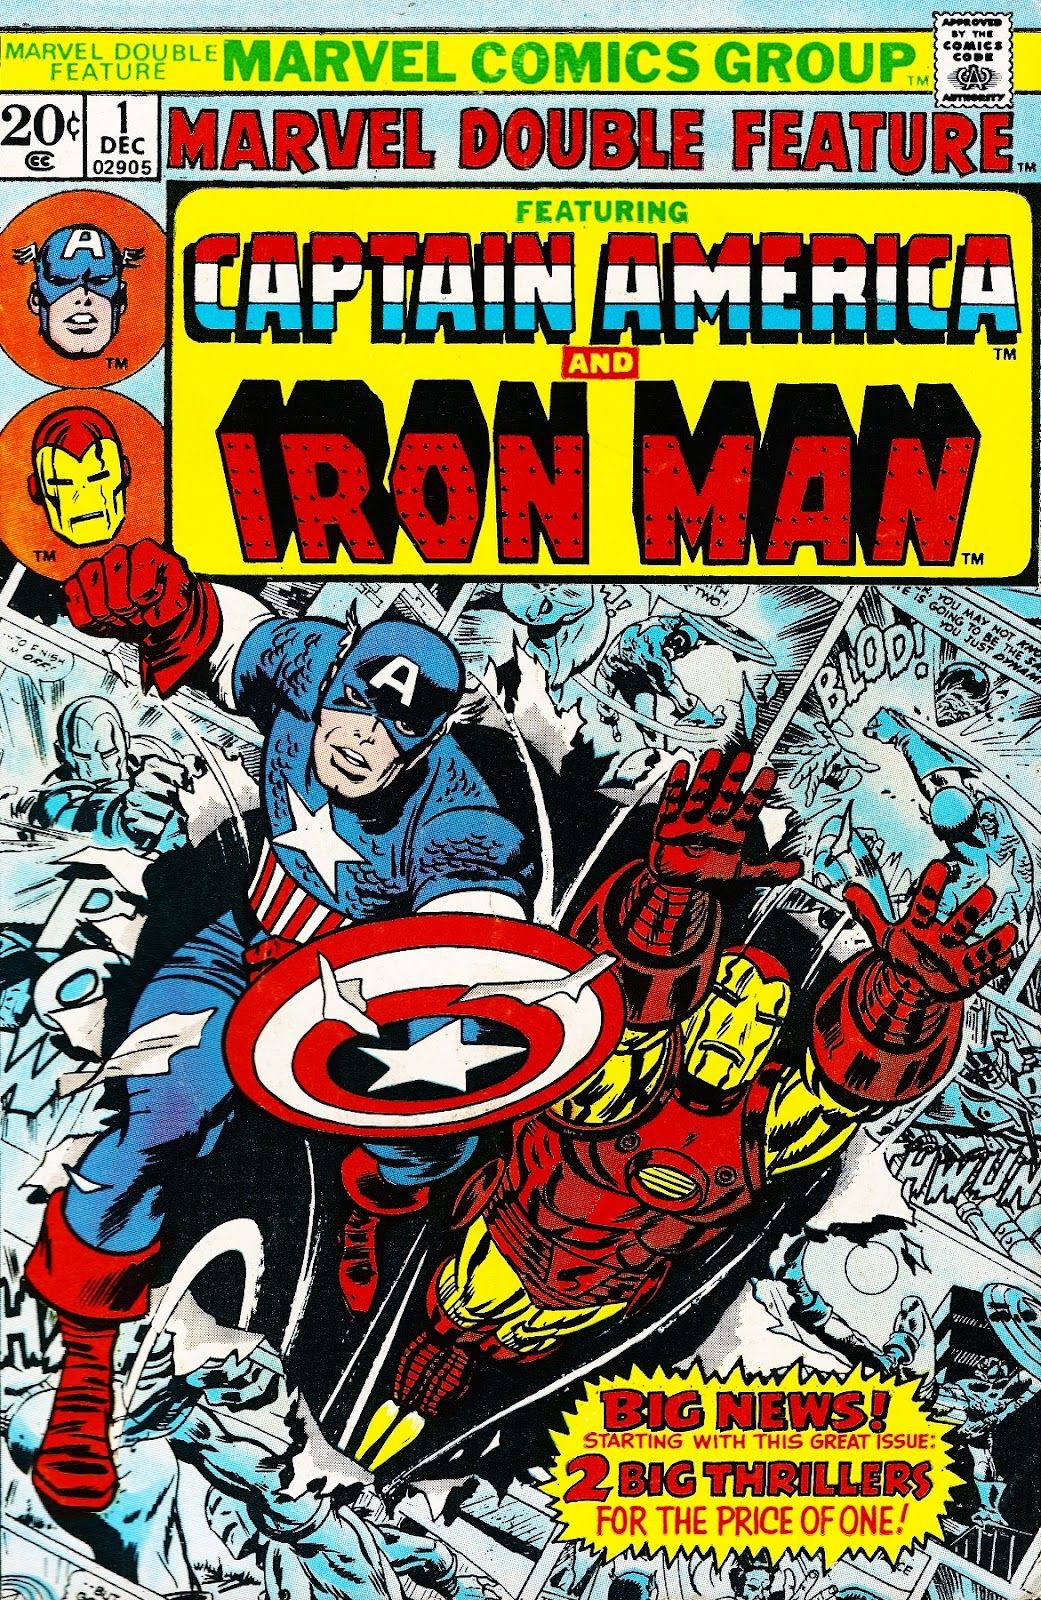 Did Marvel Add More Reprint Books to Counter Jack Kirby's Departure for DC?